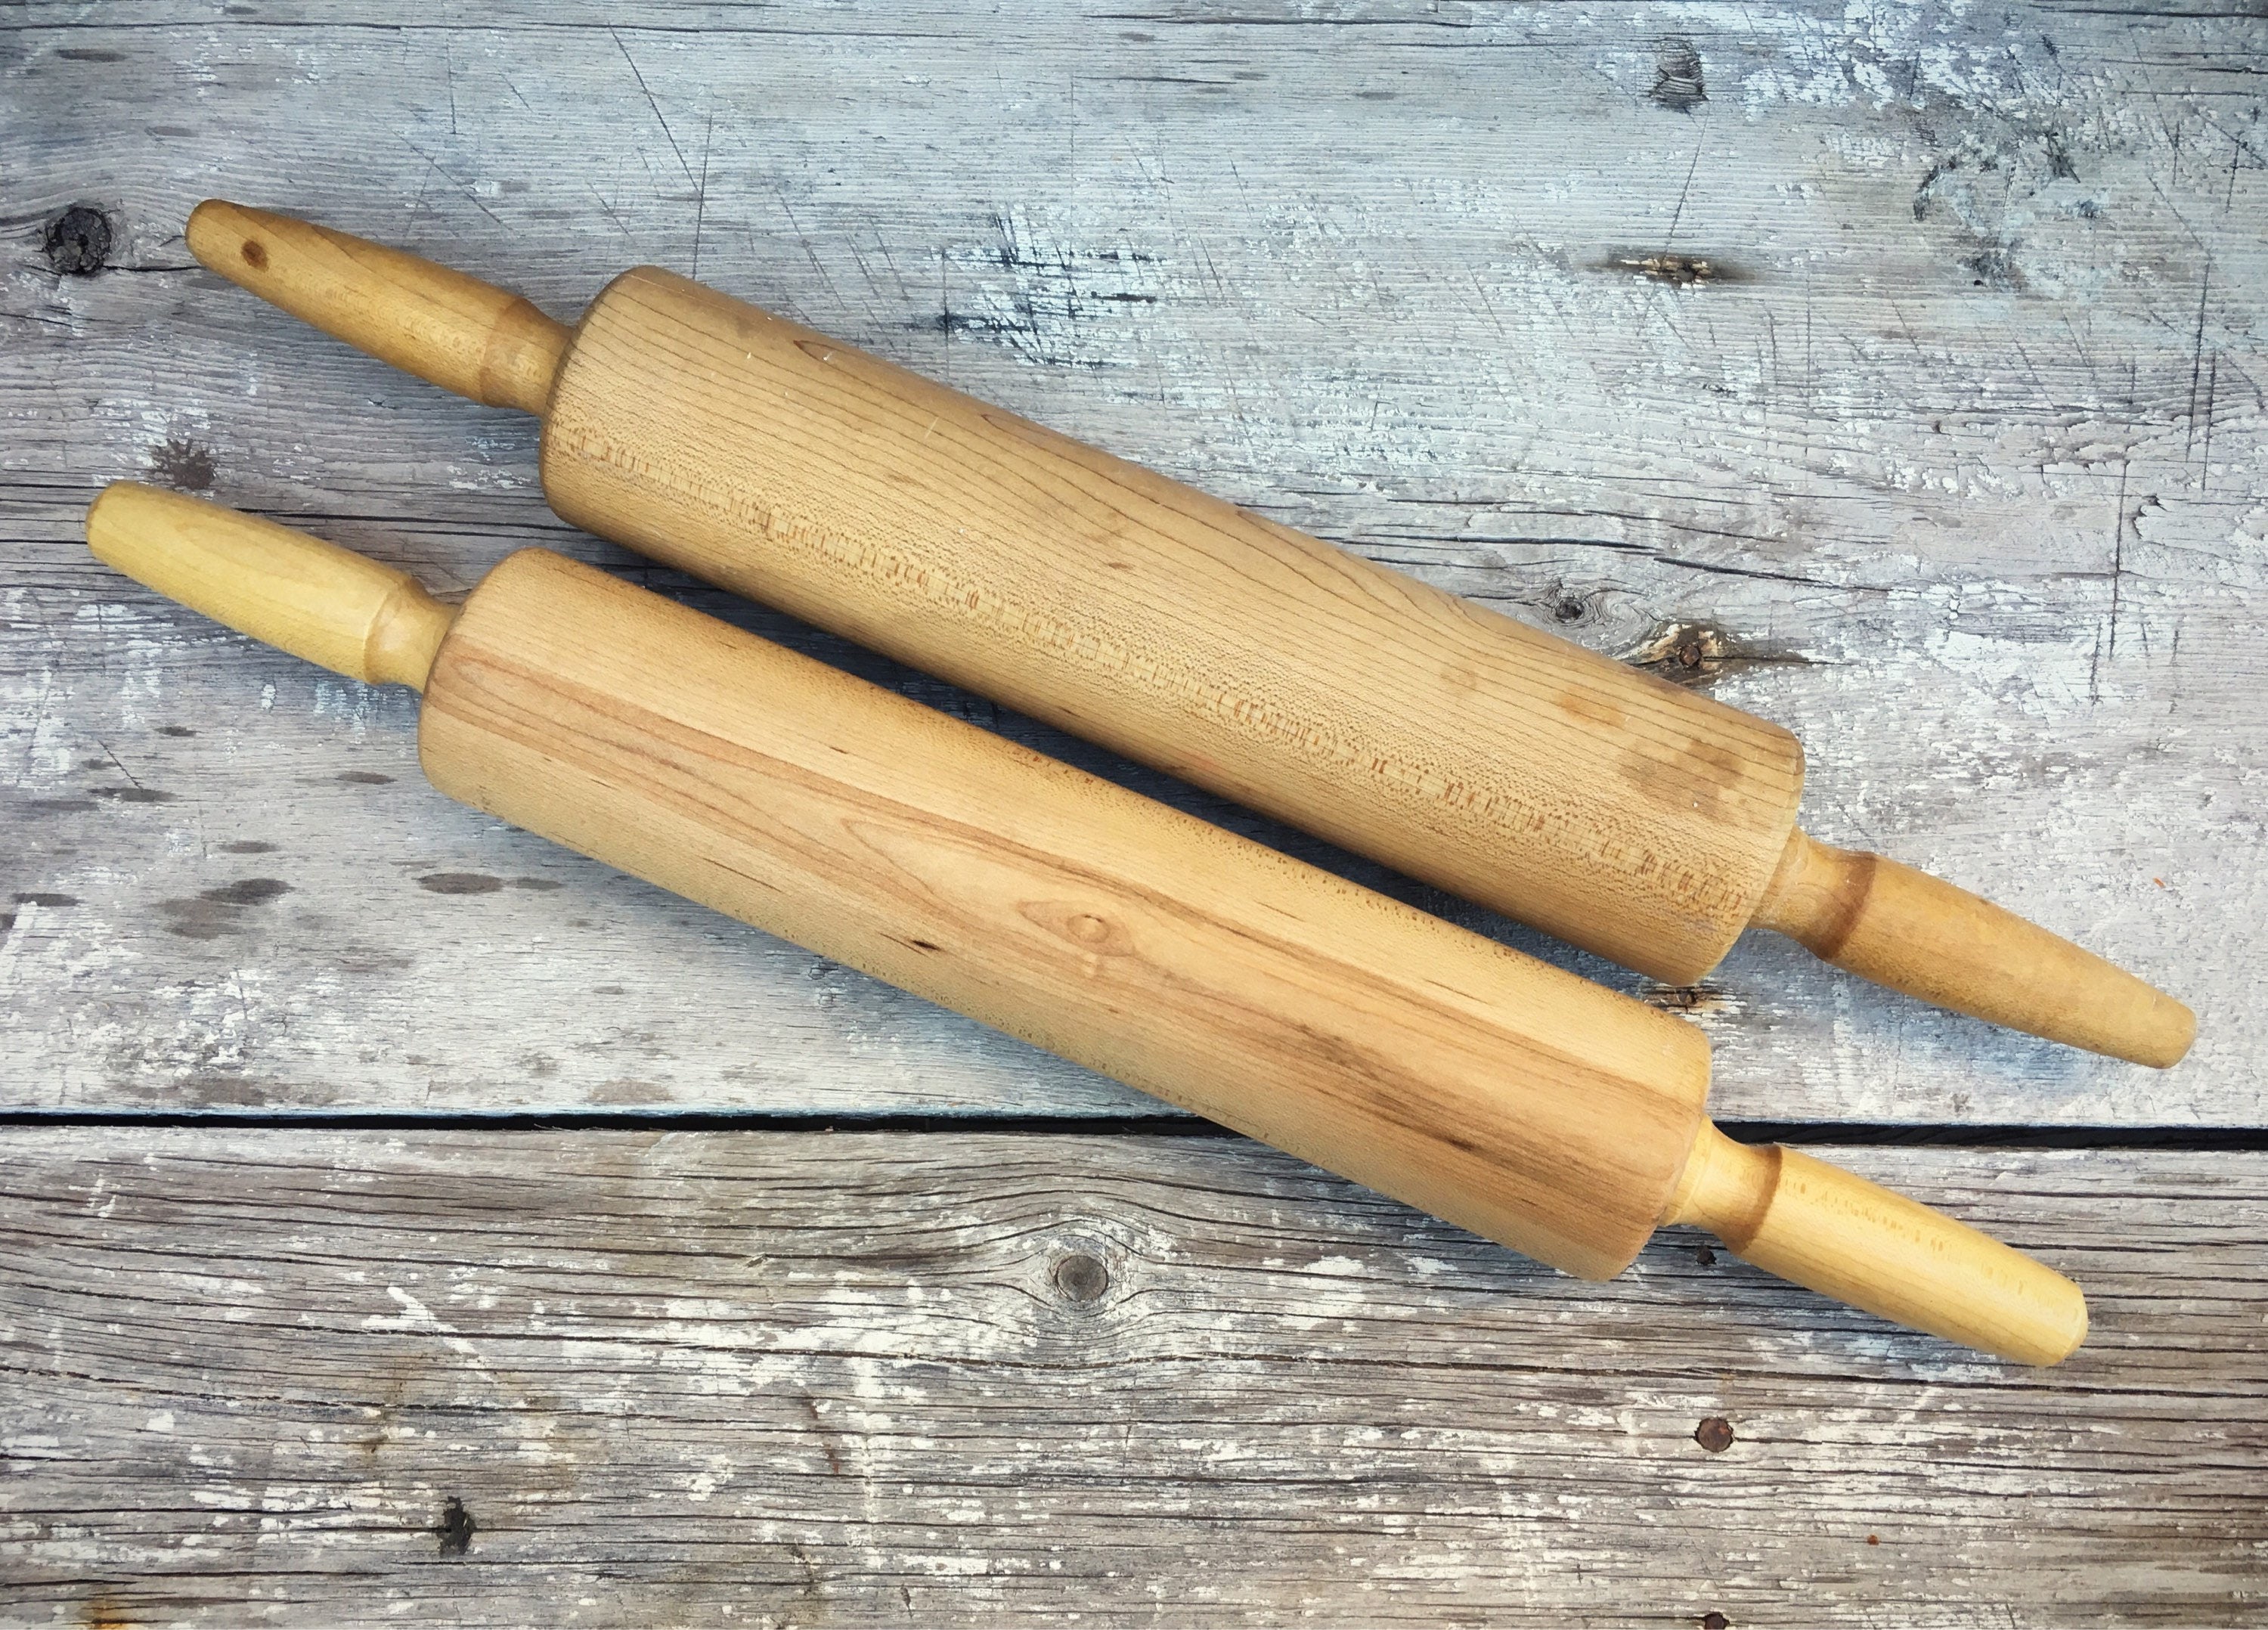 vintage kitchen wall rolling pin